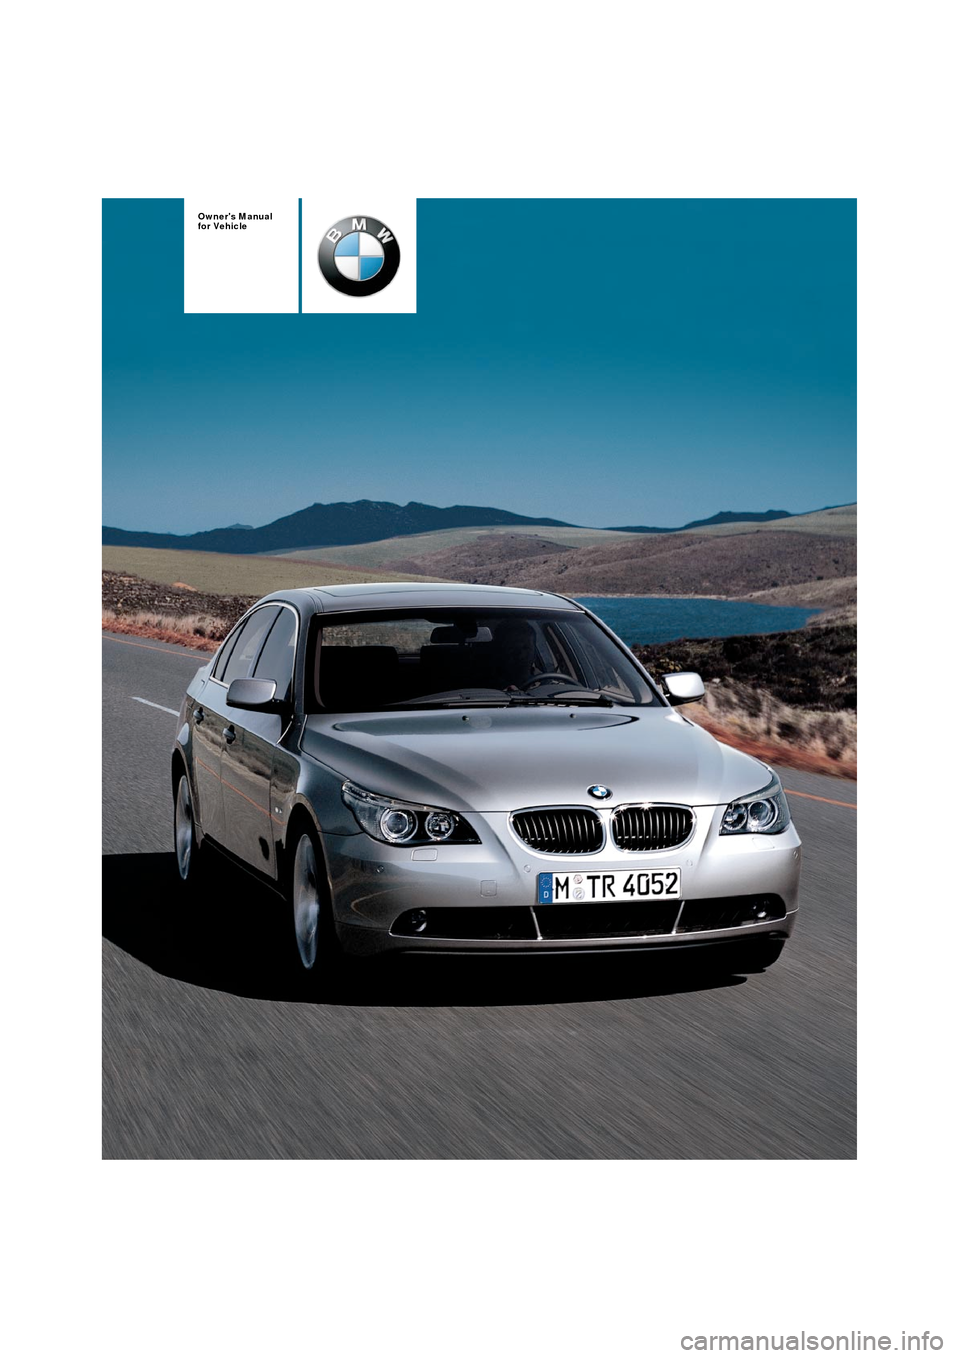 BMW 545I SEDAN 2004 E60 Owners Manual  
Owners Manual
for Vehicle 